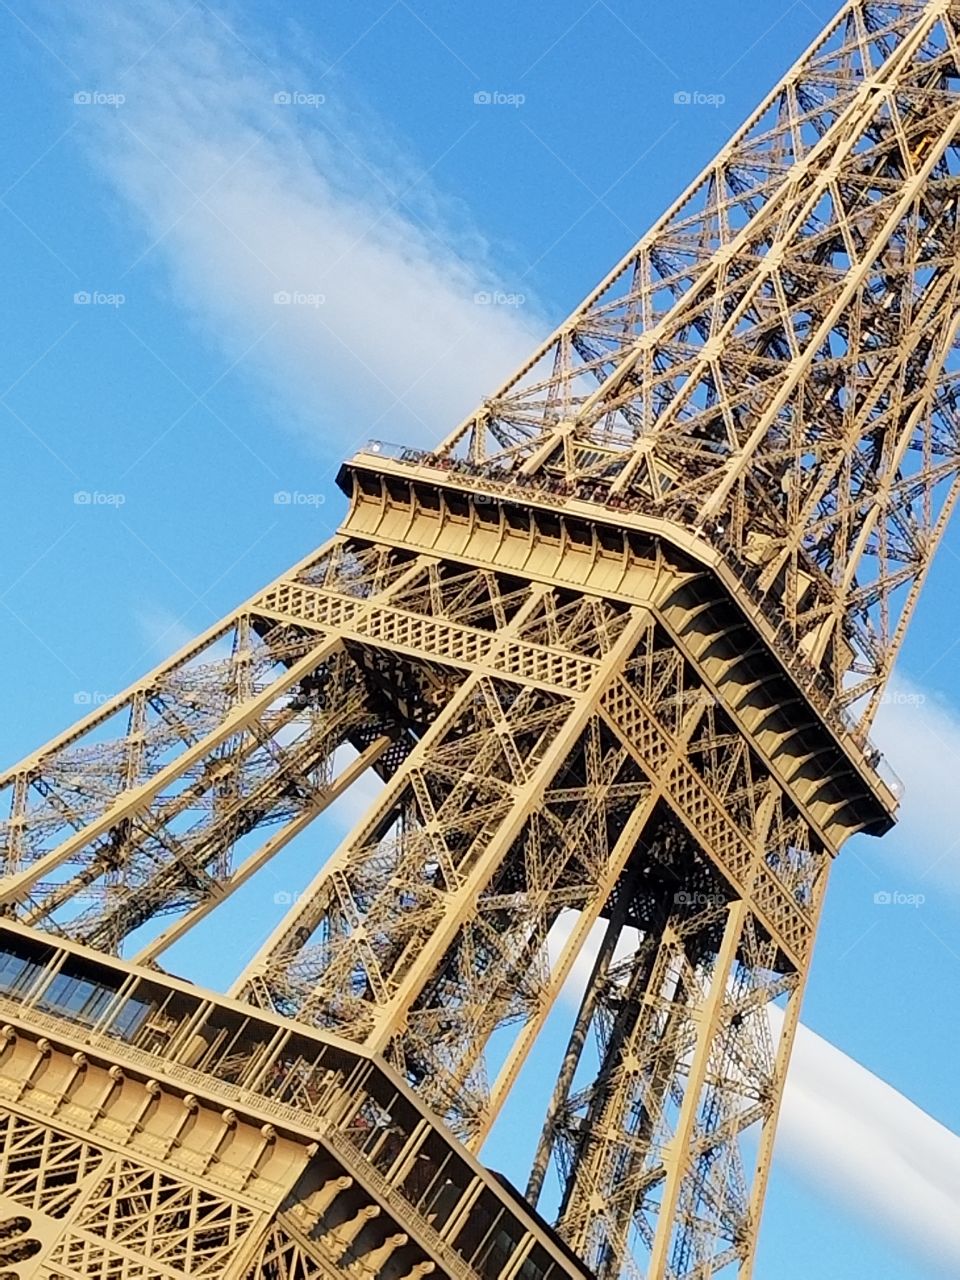 Eiffel Tower At An Angle